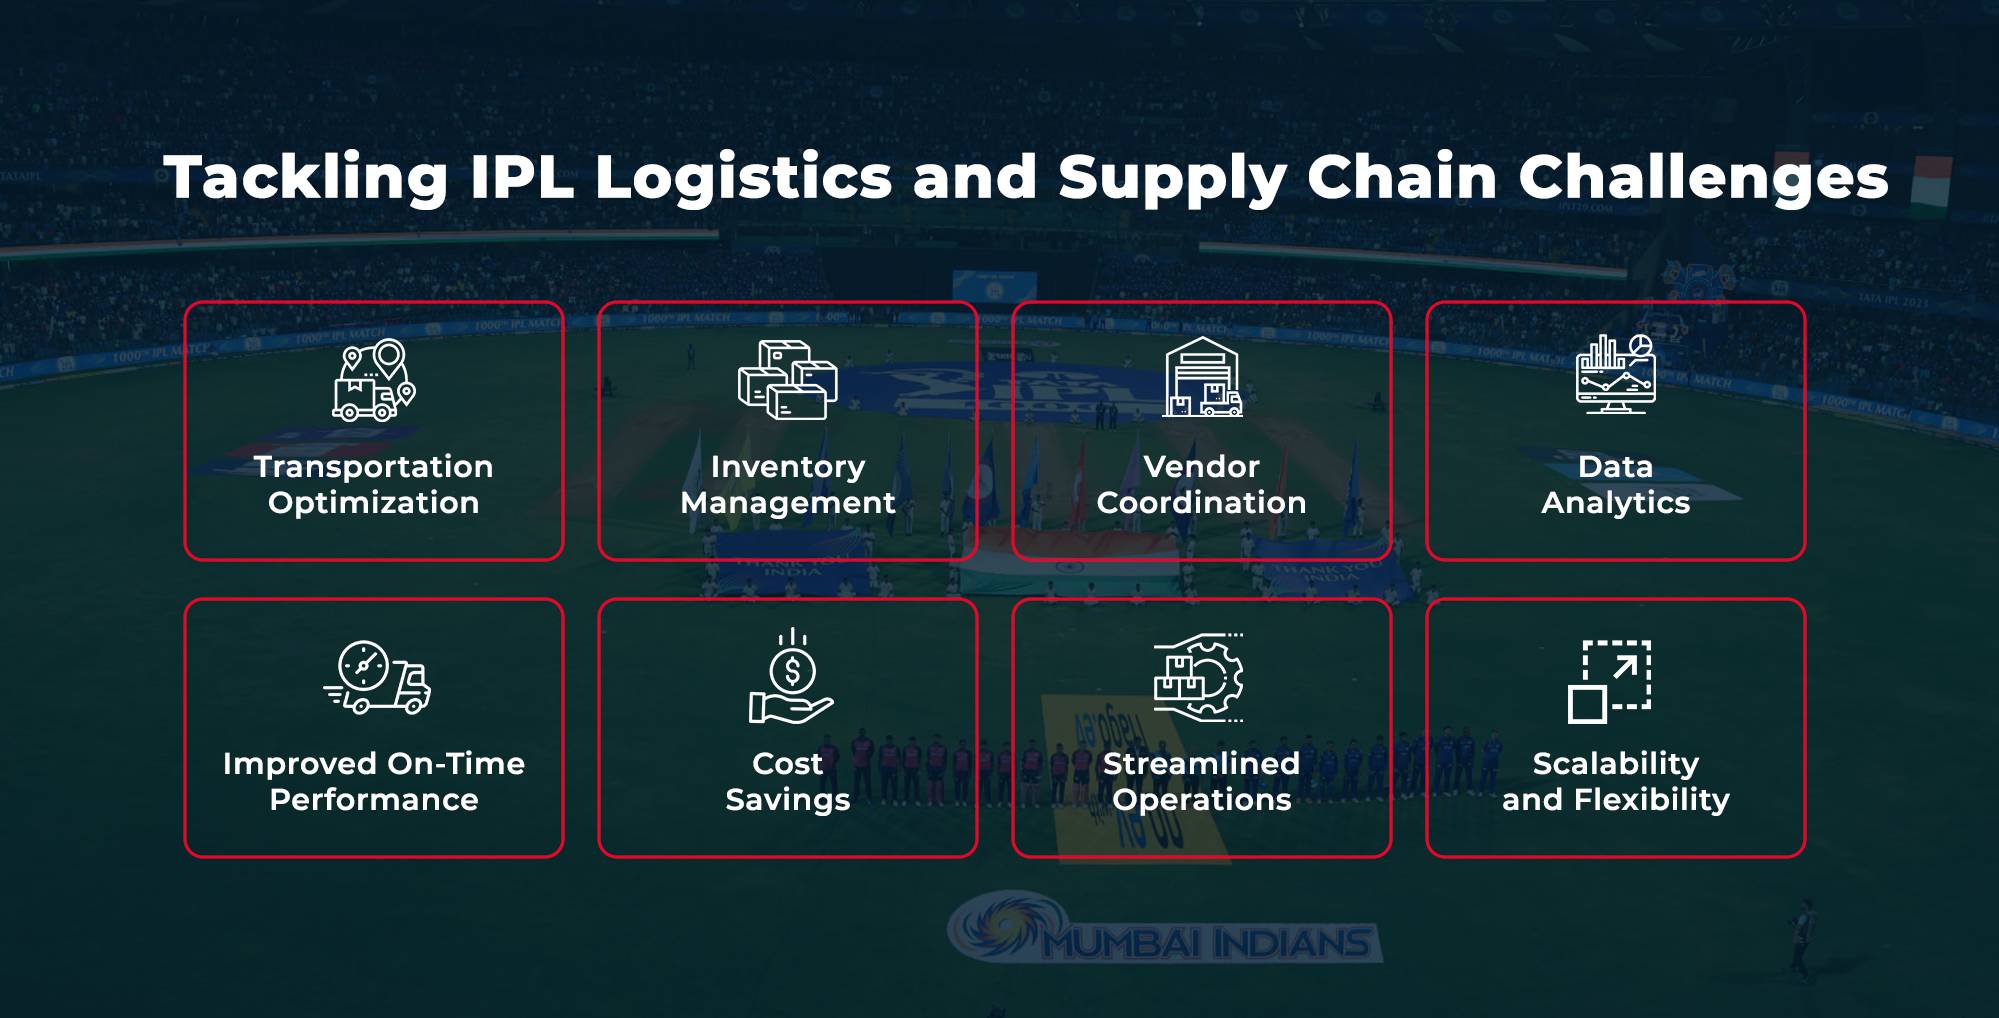 Tackling Indian Premier League Supply Chain Challenges